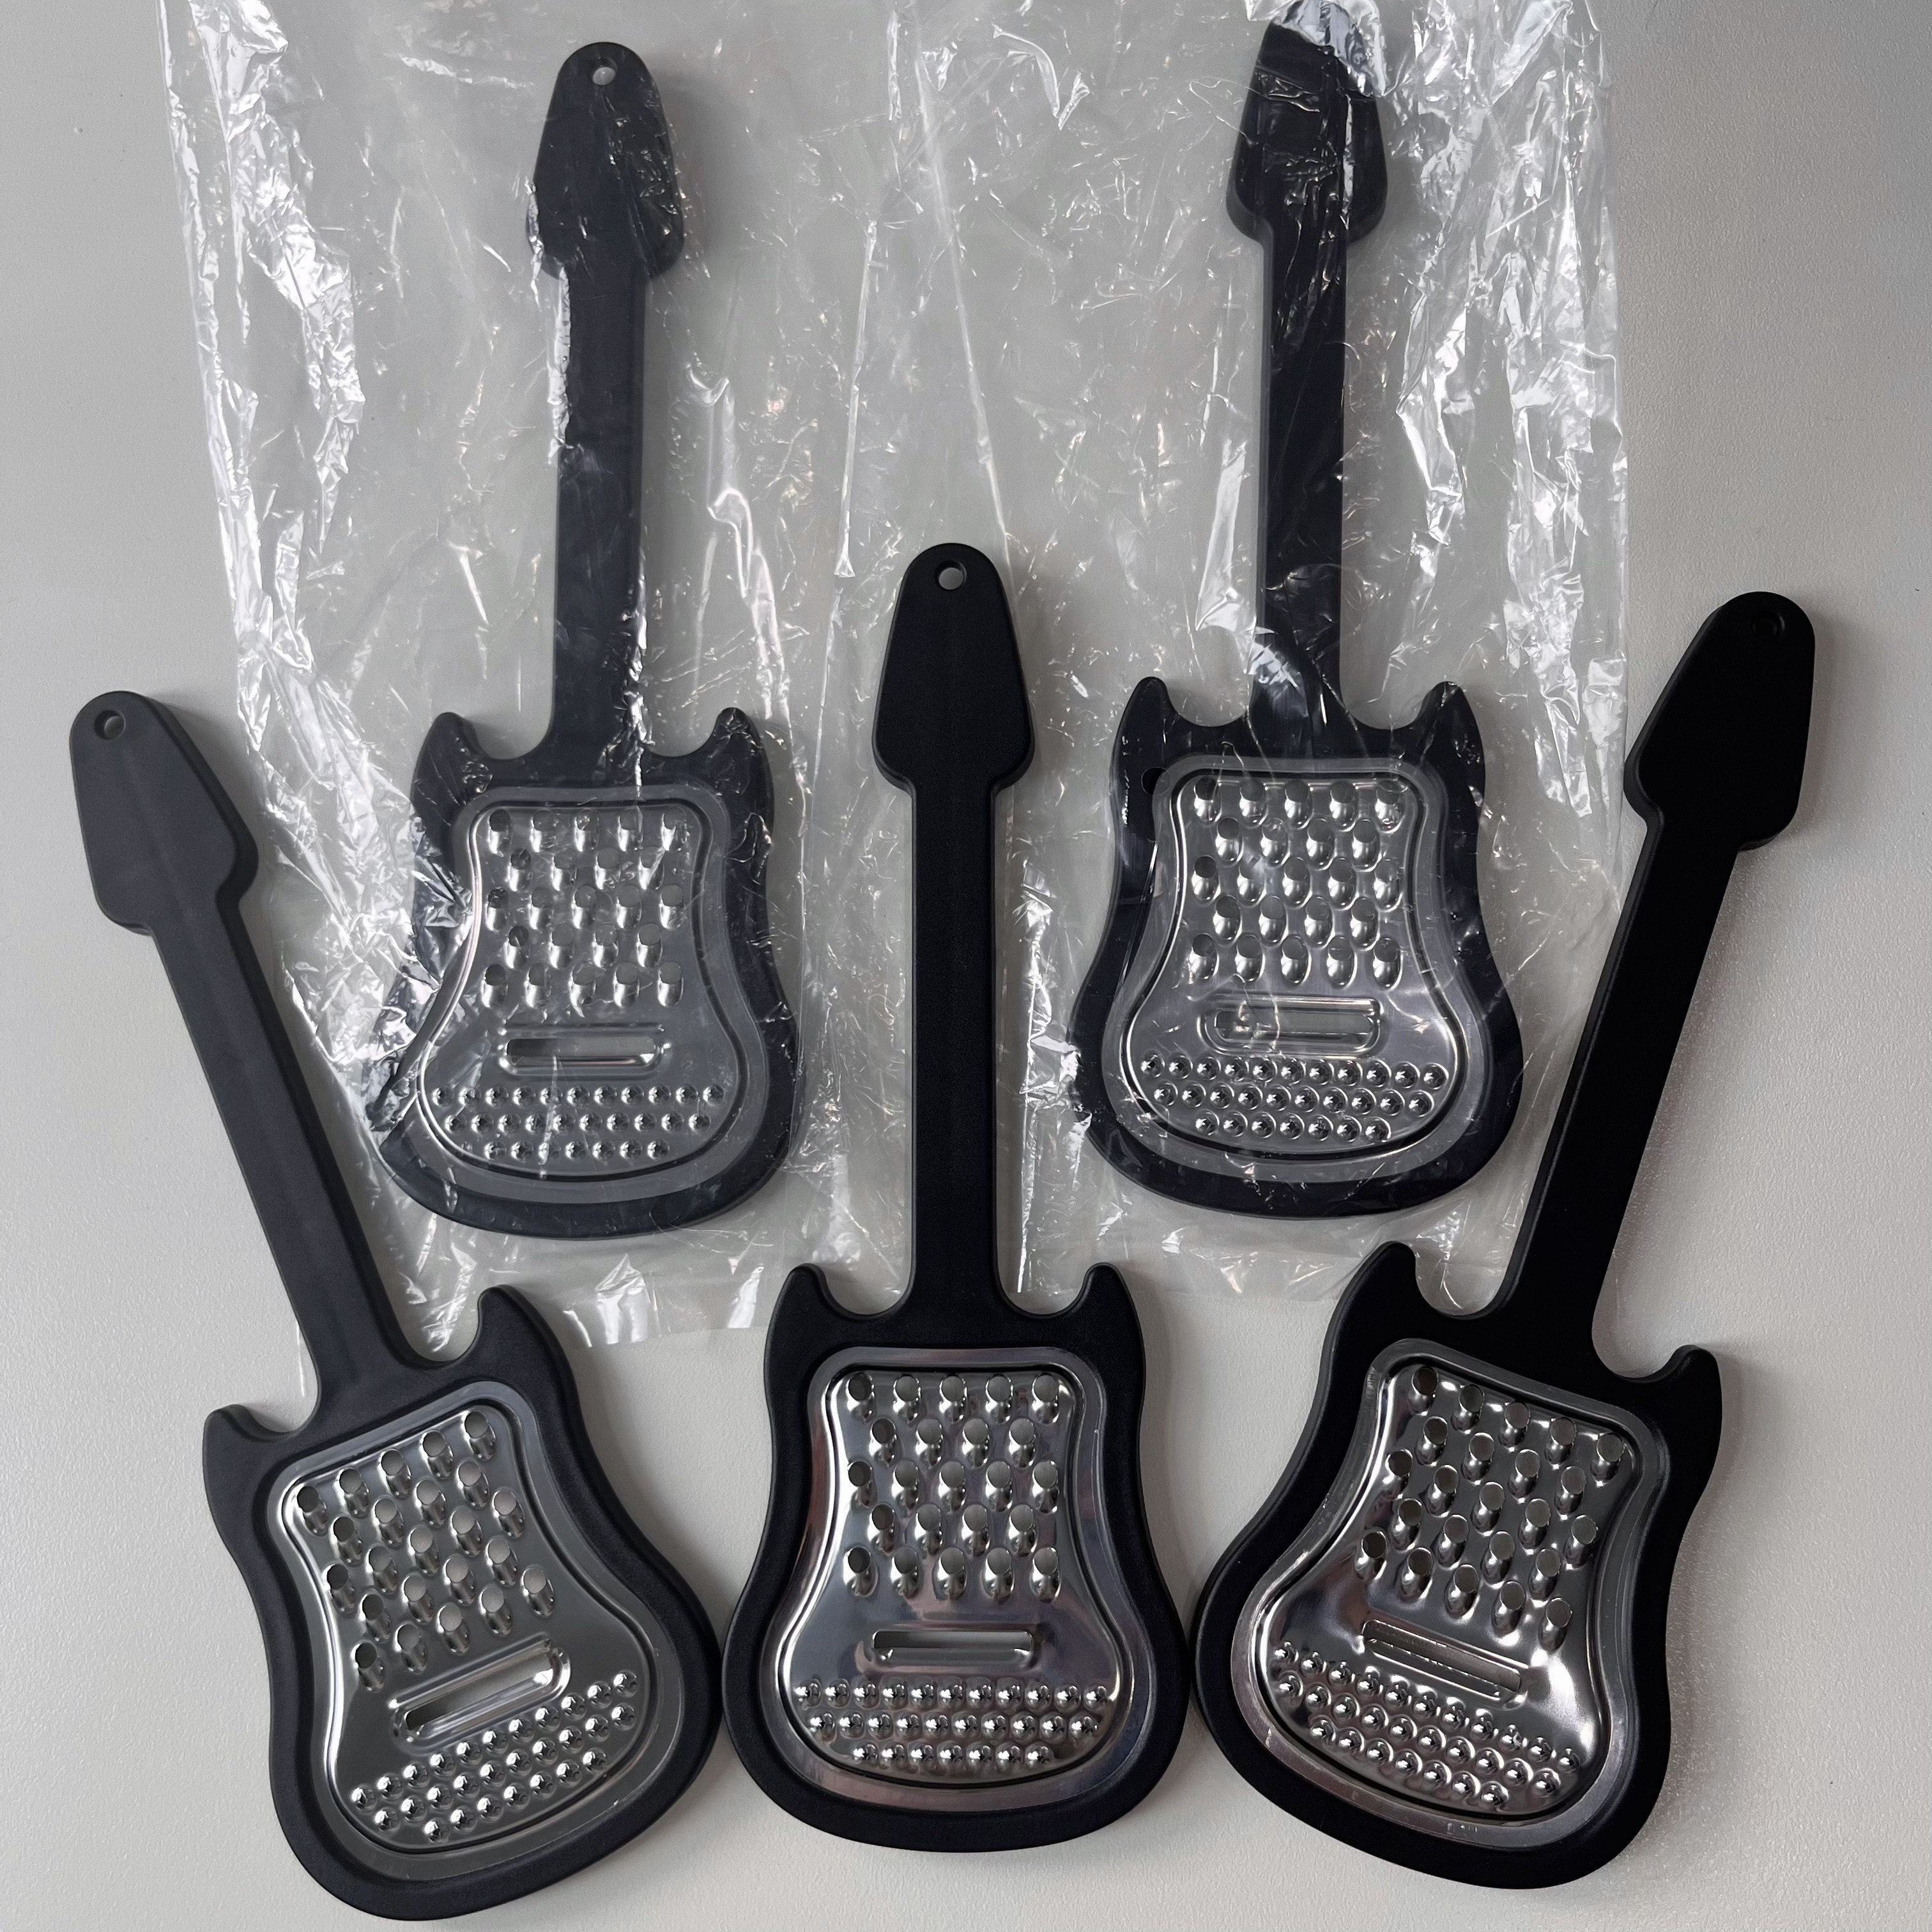 Cheese grater shaped as an electric guitar : r/ofcoursethatsathing